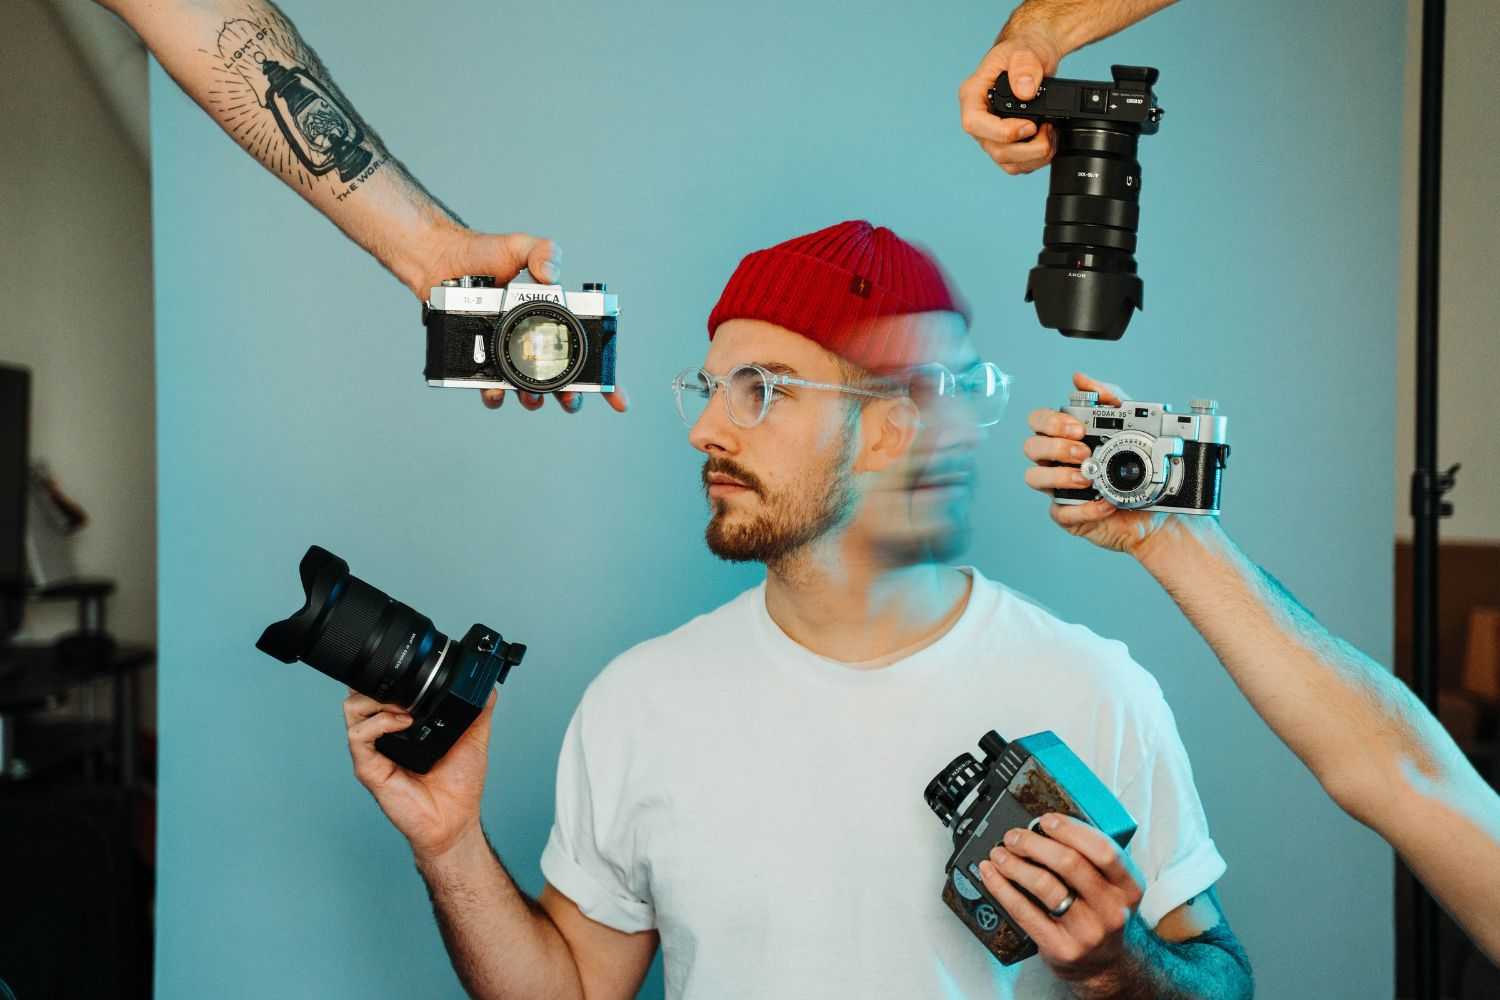 man faces multiple camera choices Photo by Ben Eaton on unsplash